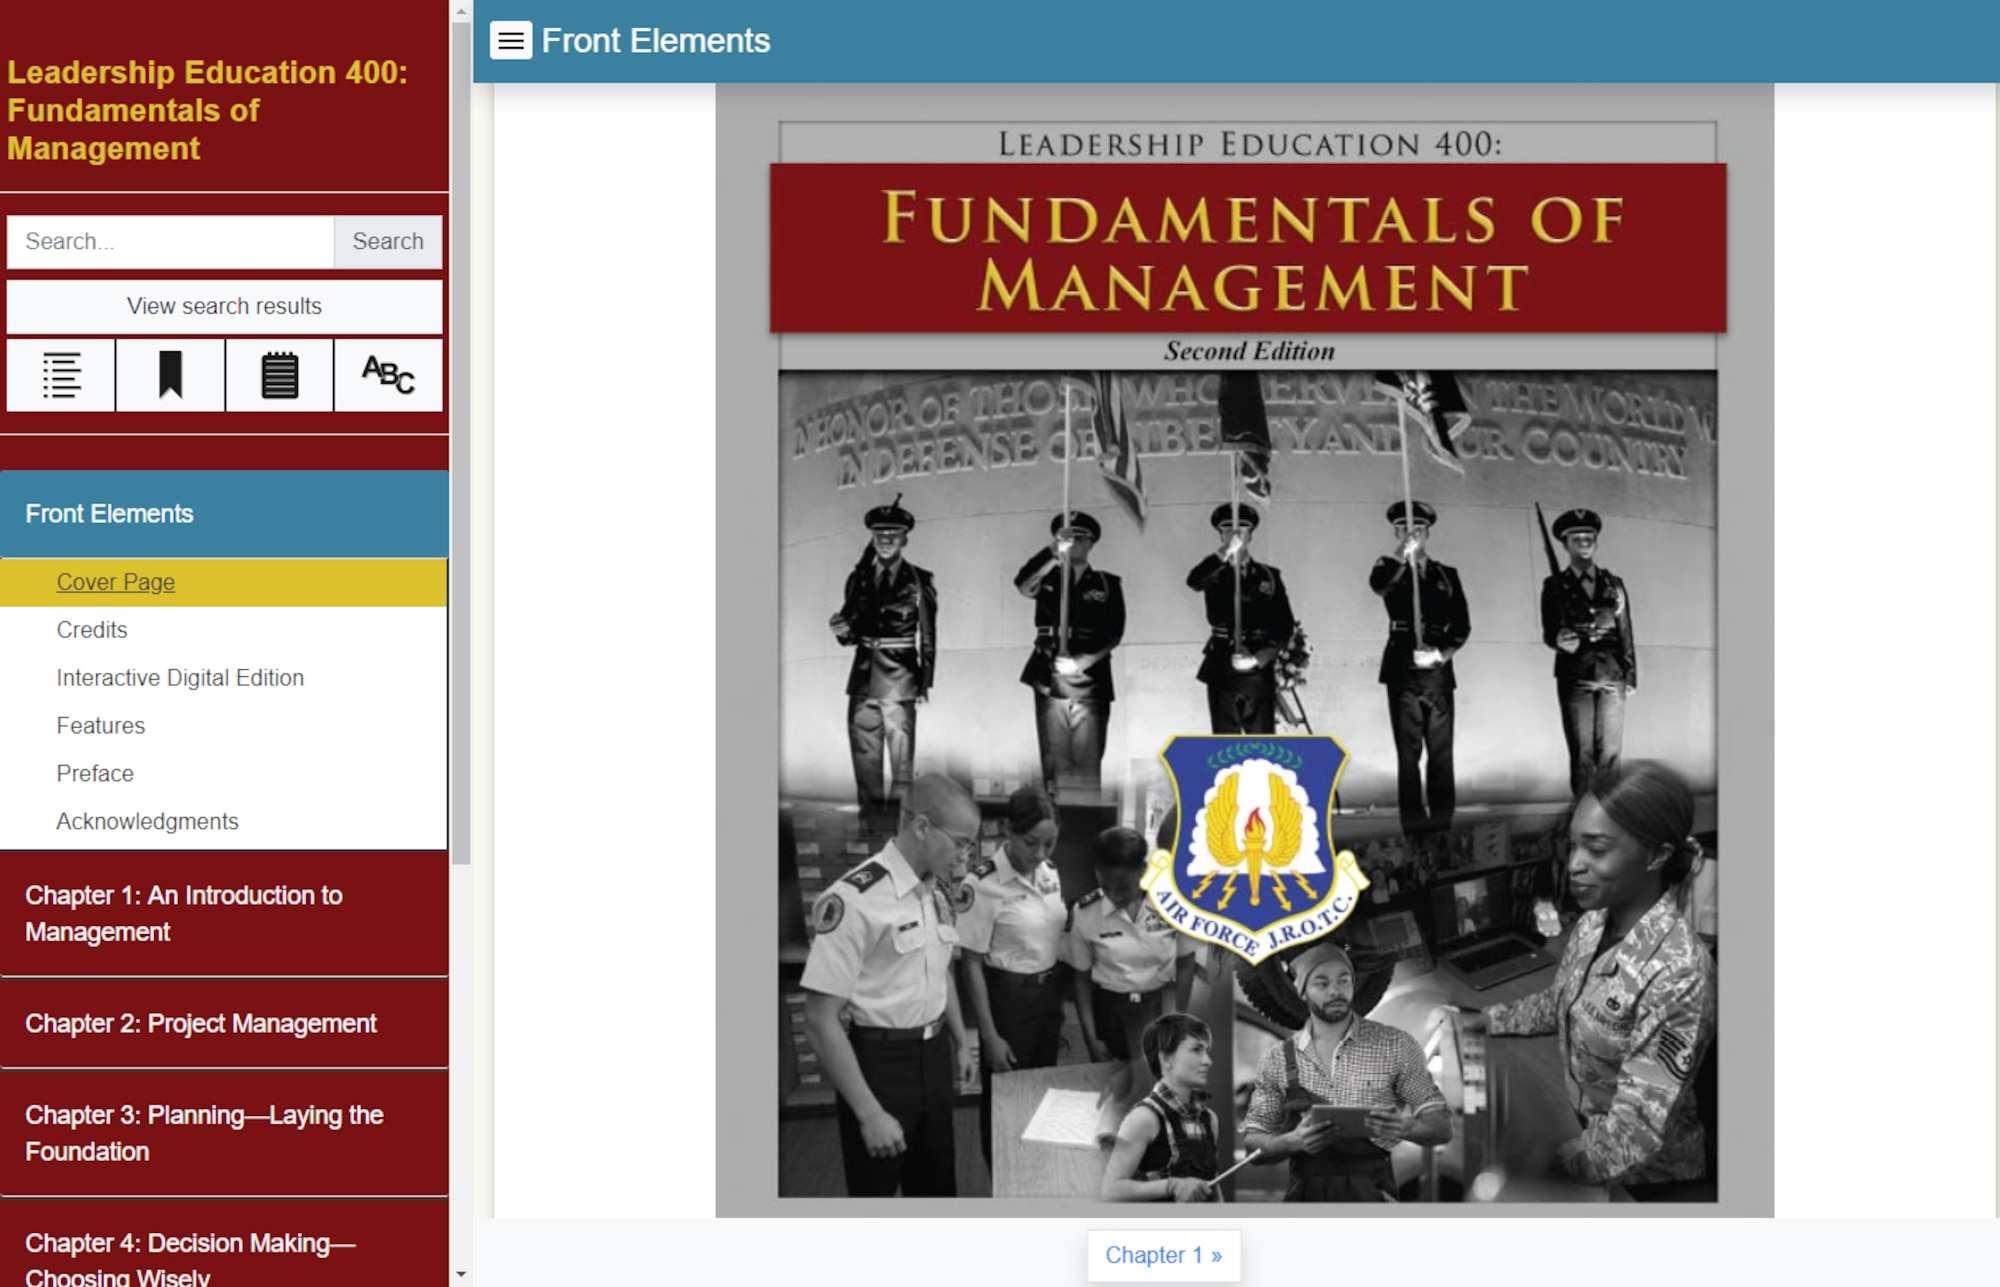 The Leadership Education 400: Fundamentals of Management user interface and cover page. The LE 400 is a part of Air Force Junior Reserve Officer Training Corps curriculum, and it is available to more than 125,000 cadets participating in the program around the world. (courtesy graphic)